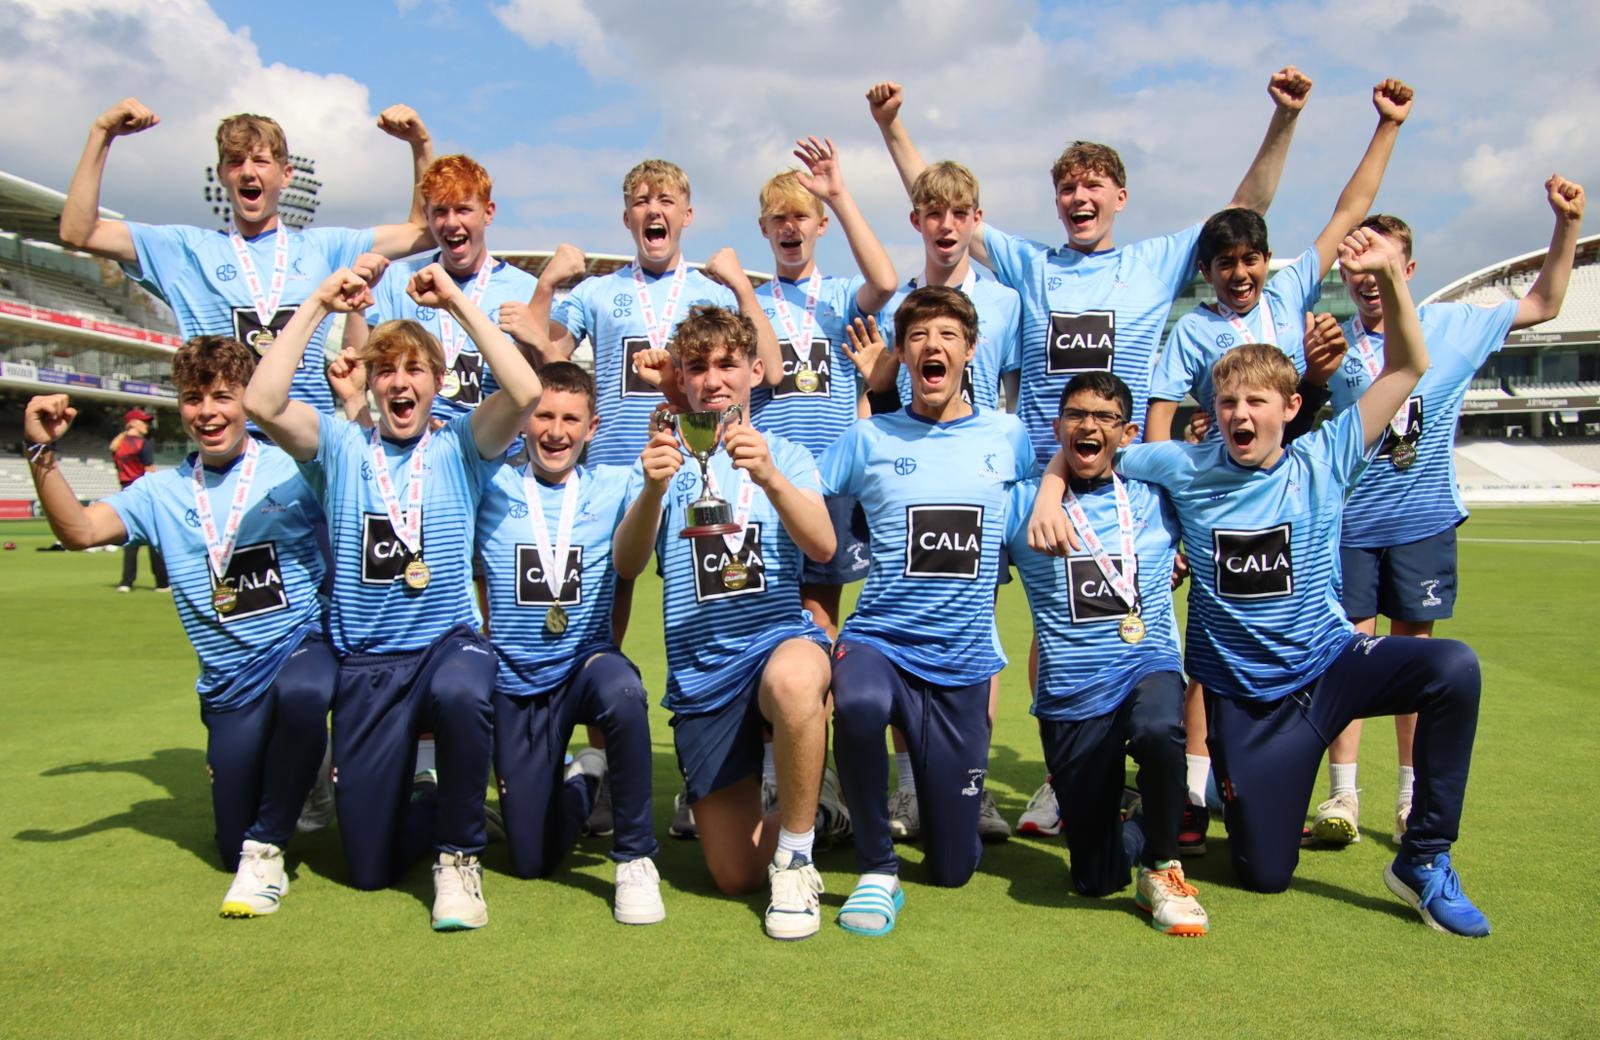 CARLTON UNDER 15s SECURE HISTORIC NATIONAL TITLE AT LORD’S